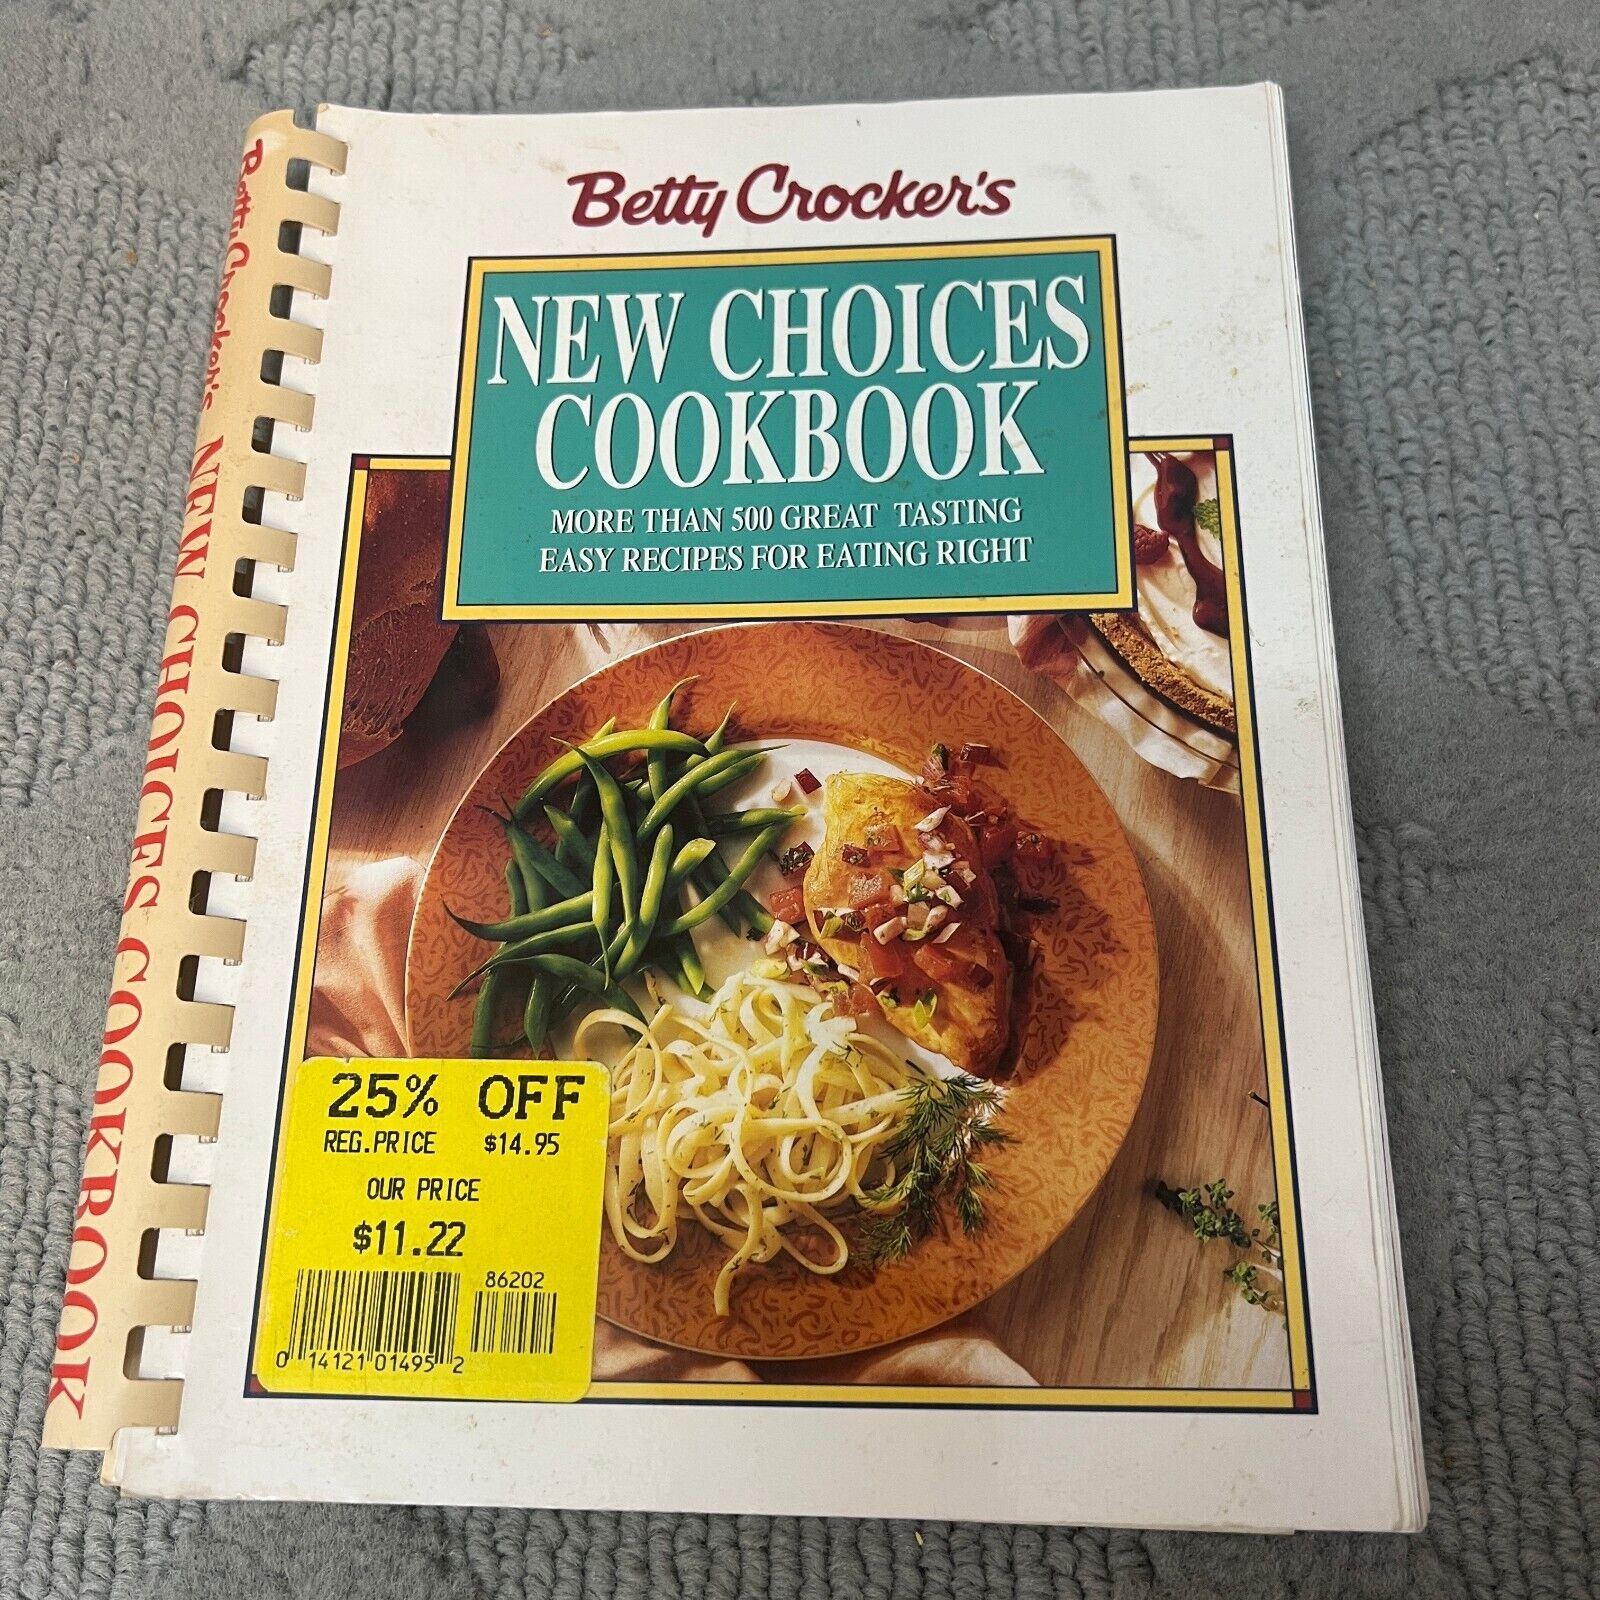 Primary image for Betty Crocker's New Choices Cookbook Hardcover Book from Simon and Schuster 1997